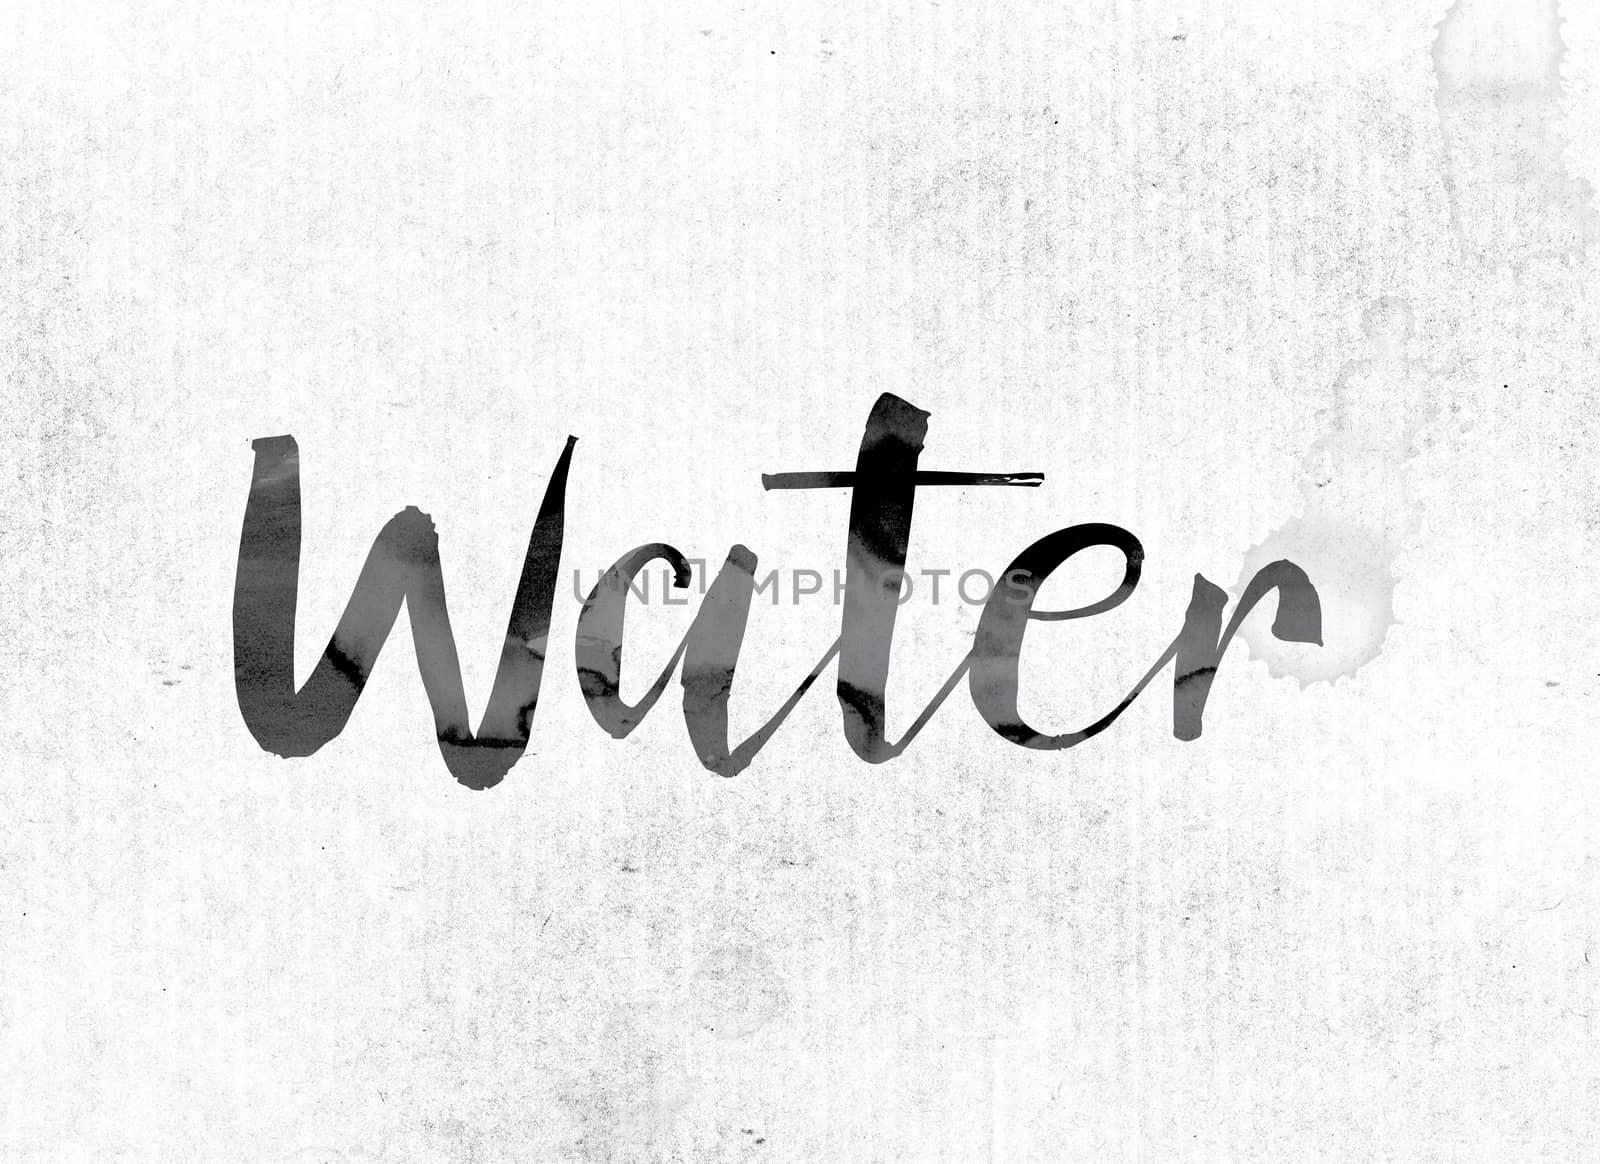 The word "Water" concept and theme painted in watercolor ink on a white paper.